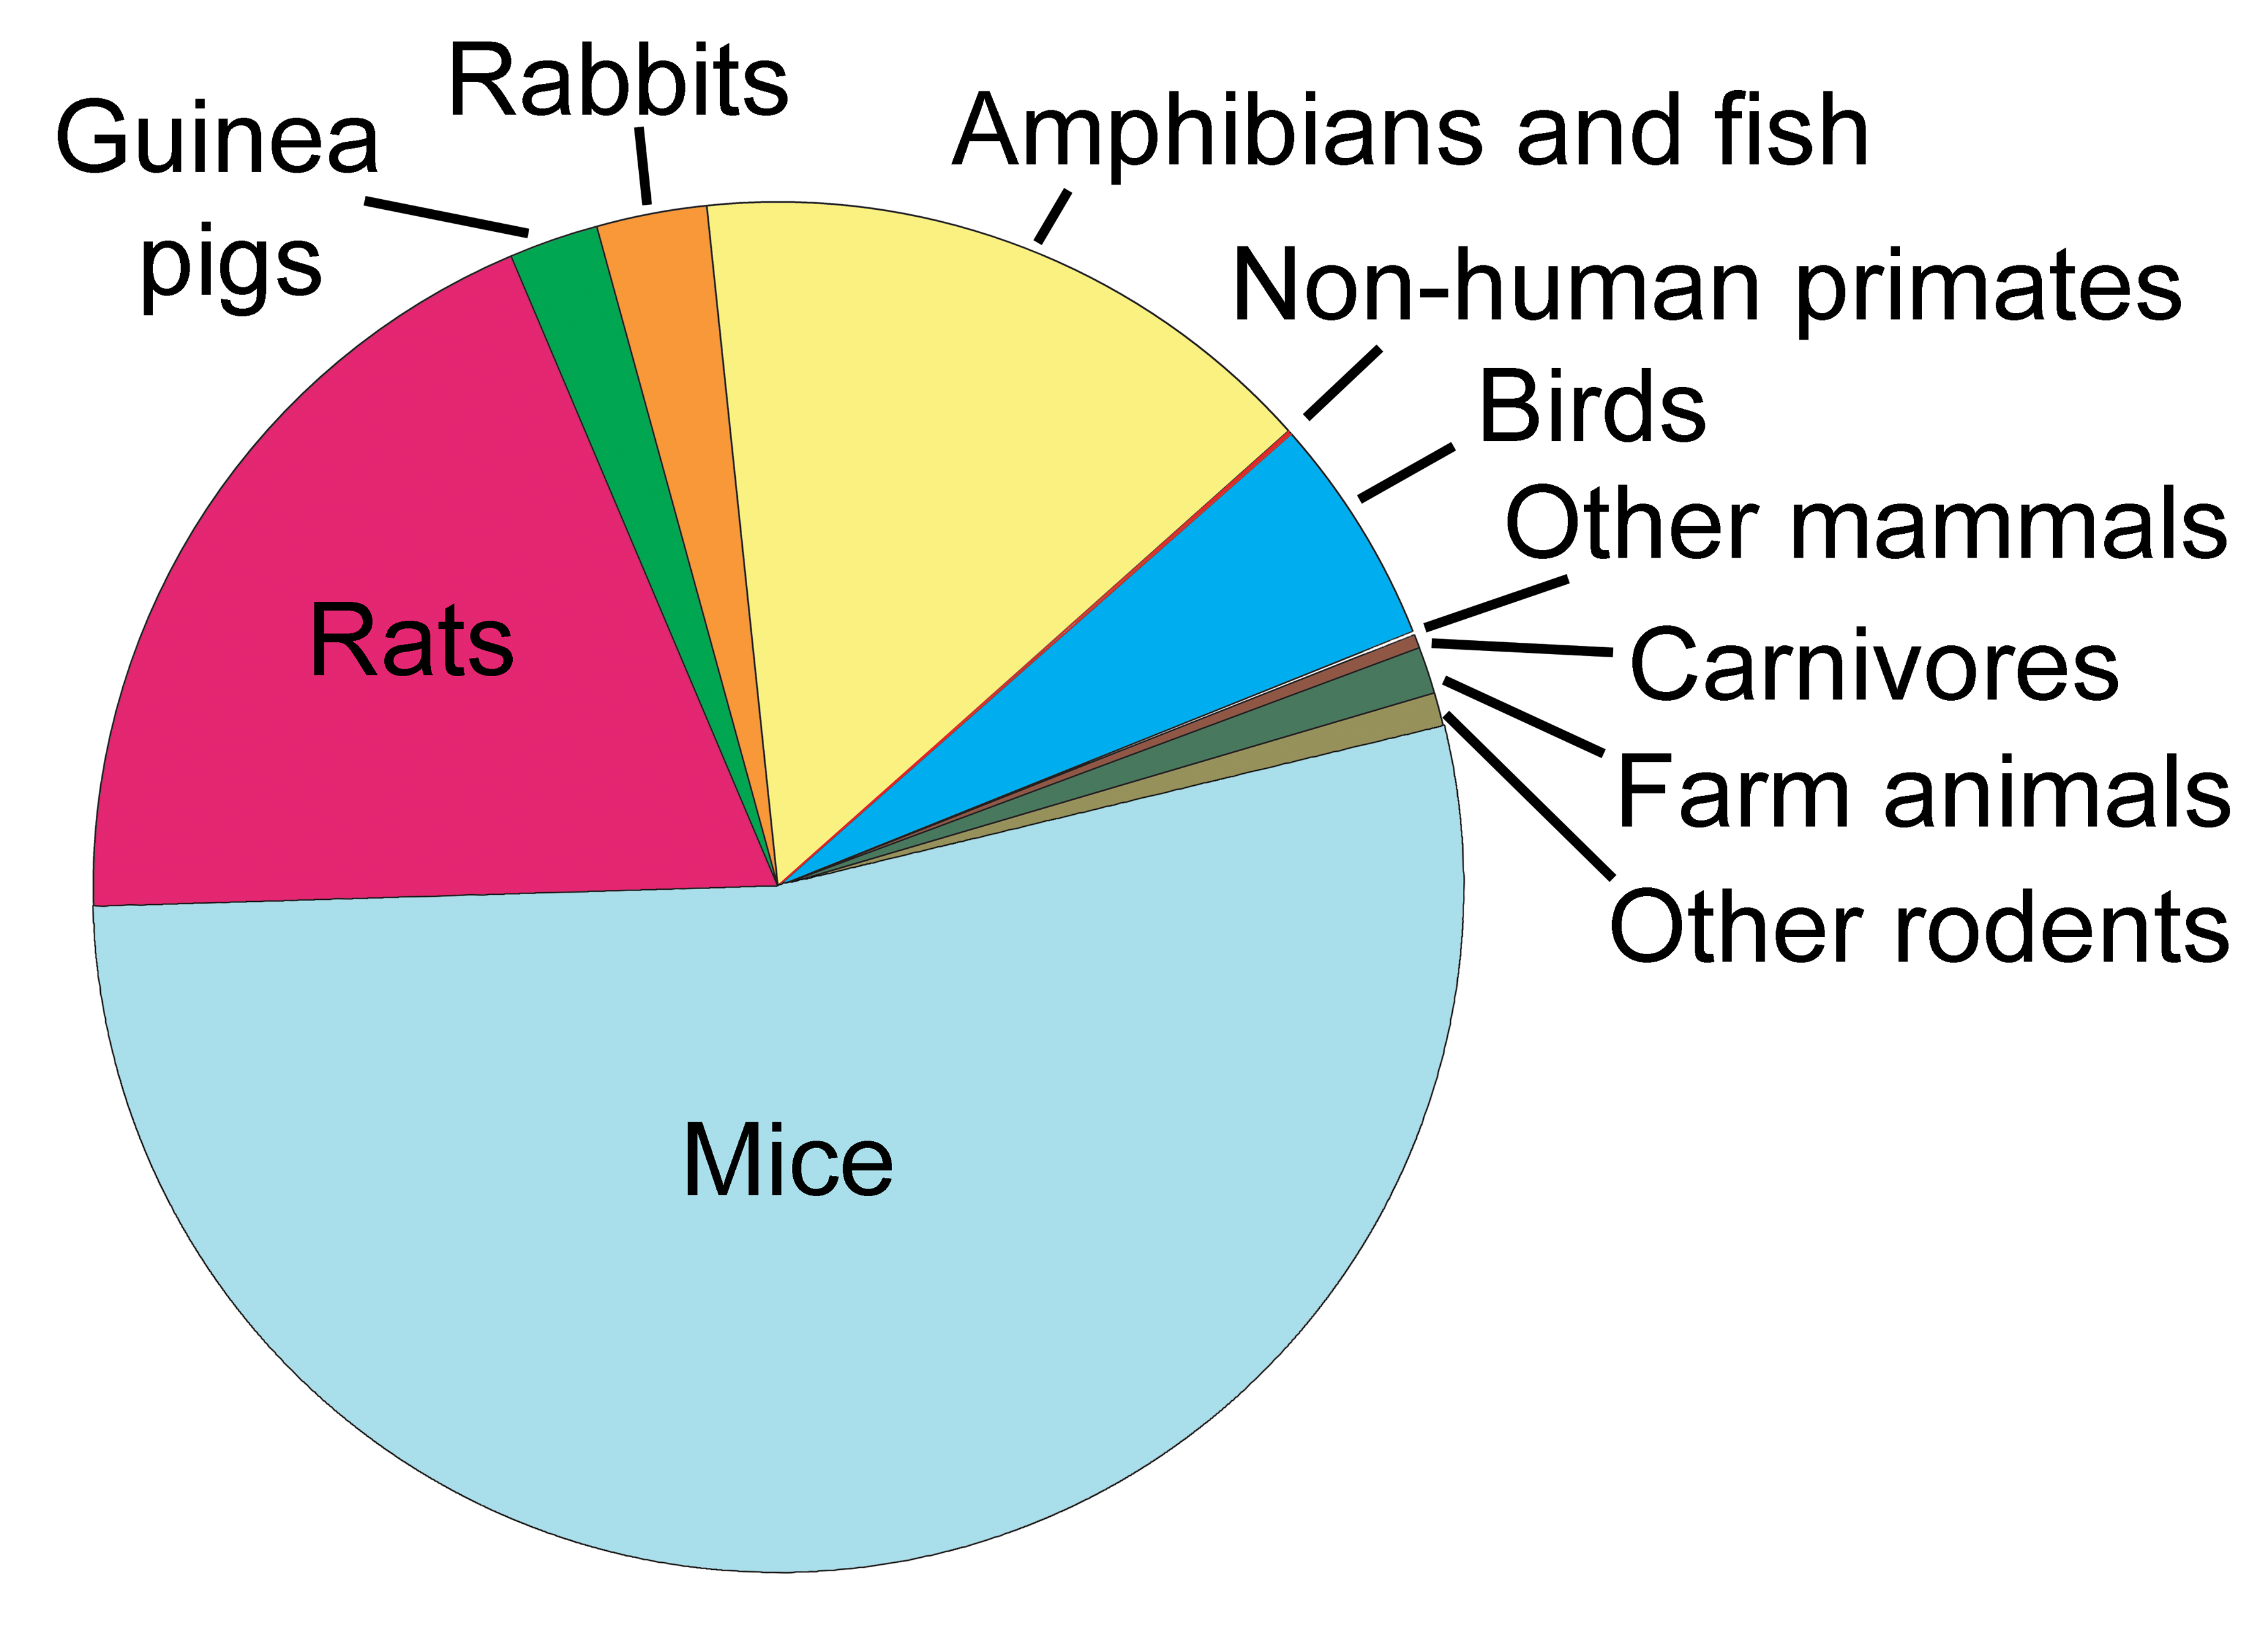 Animals used for experimentation